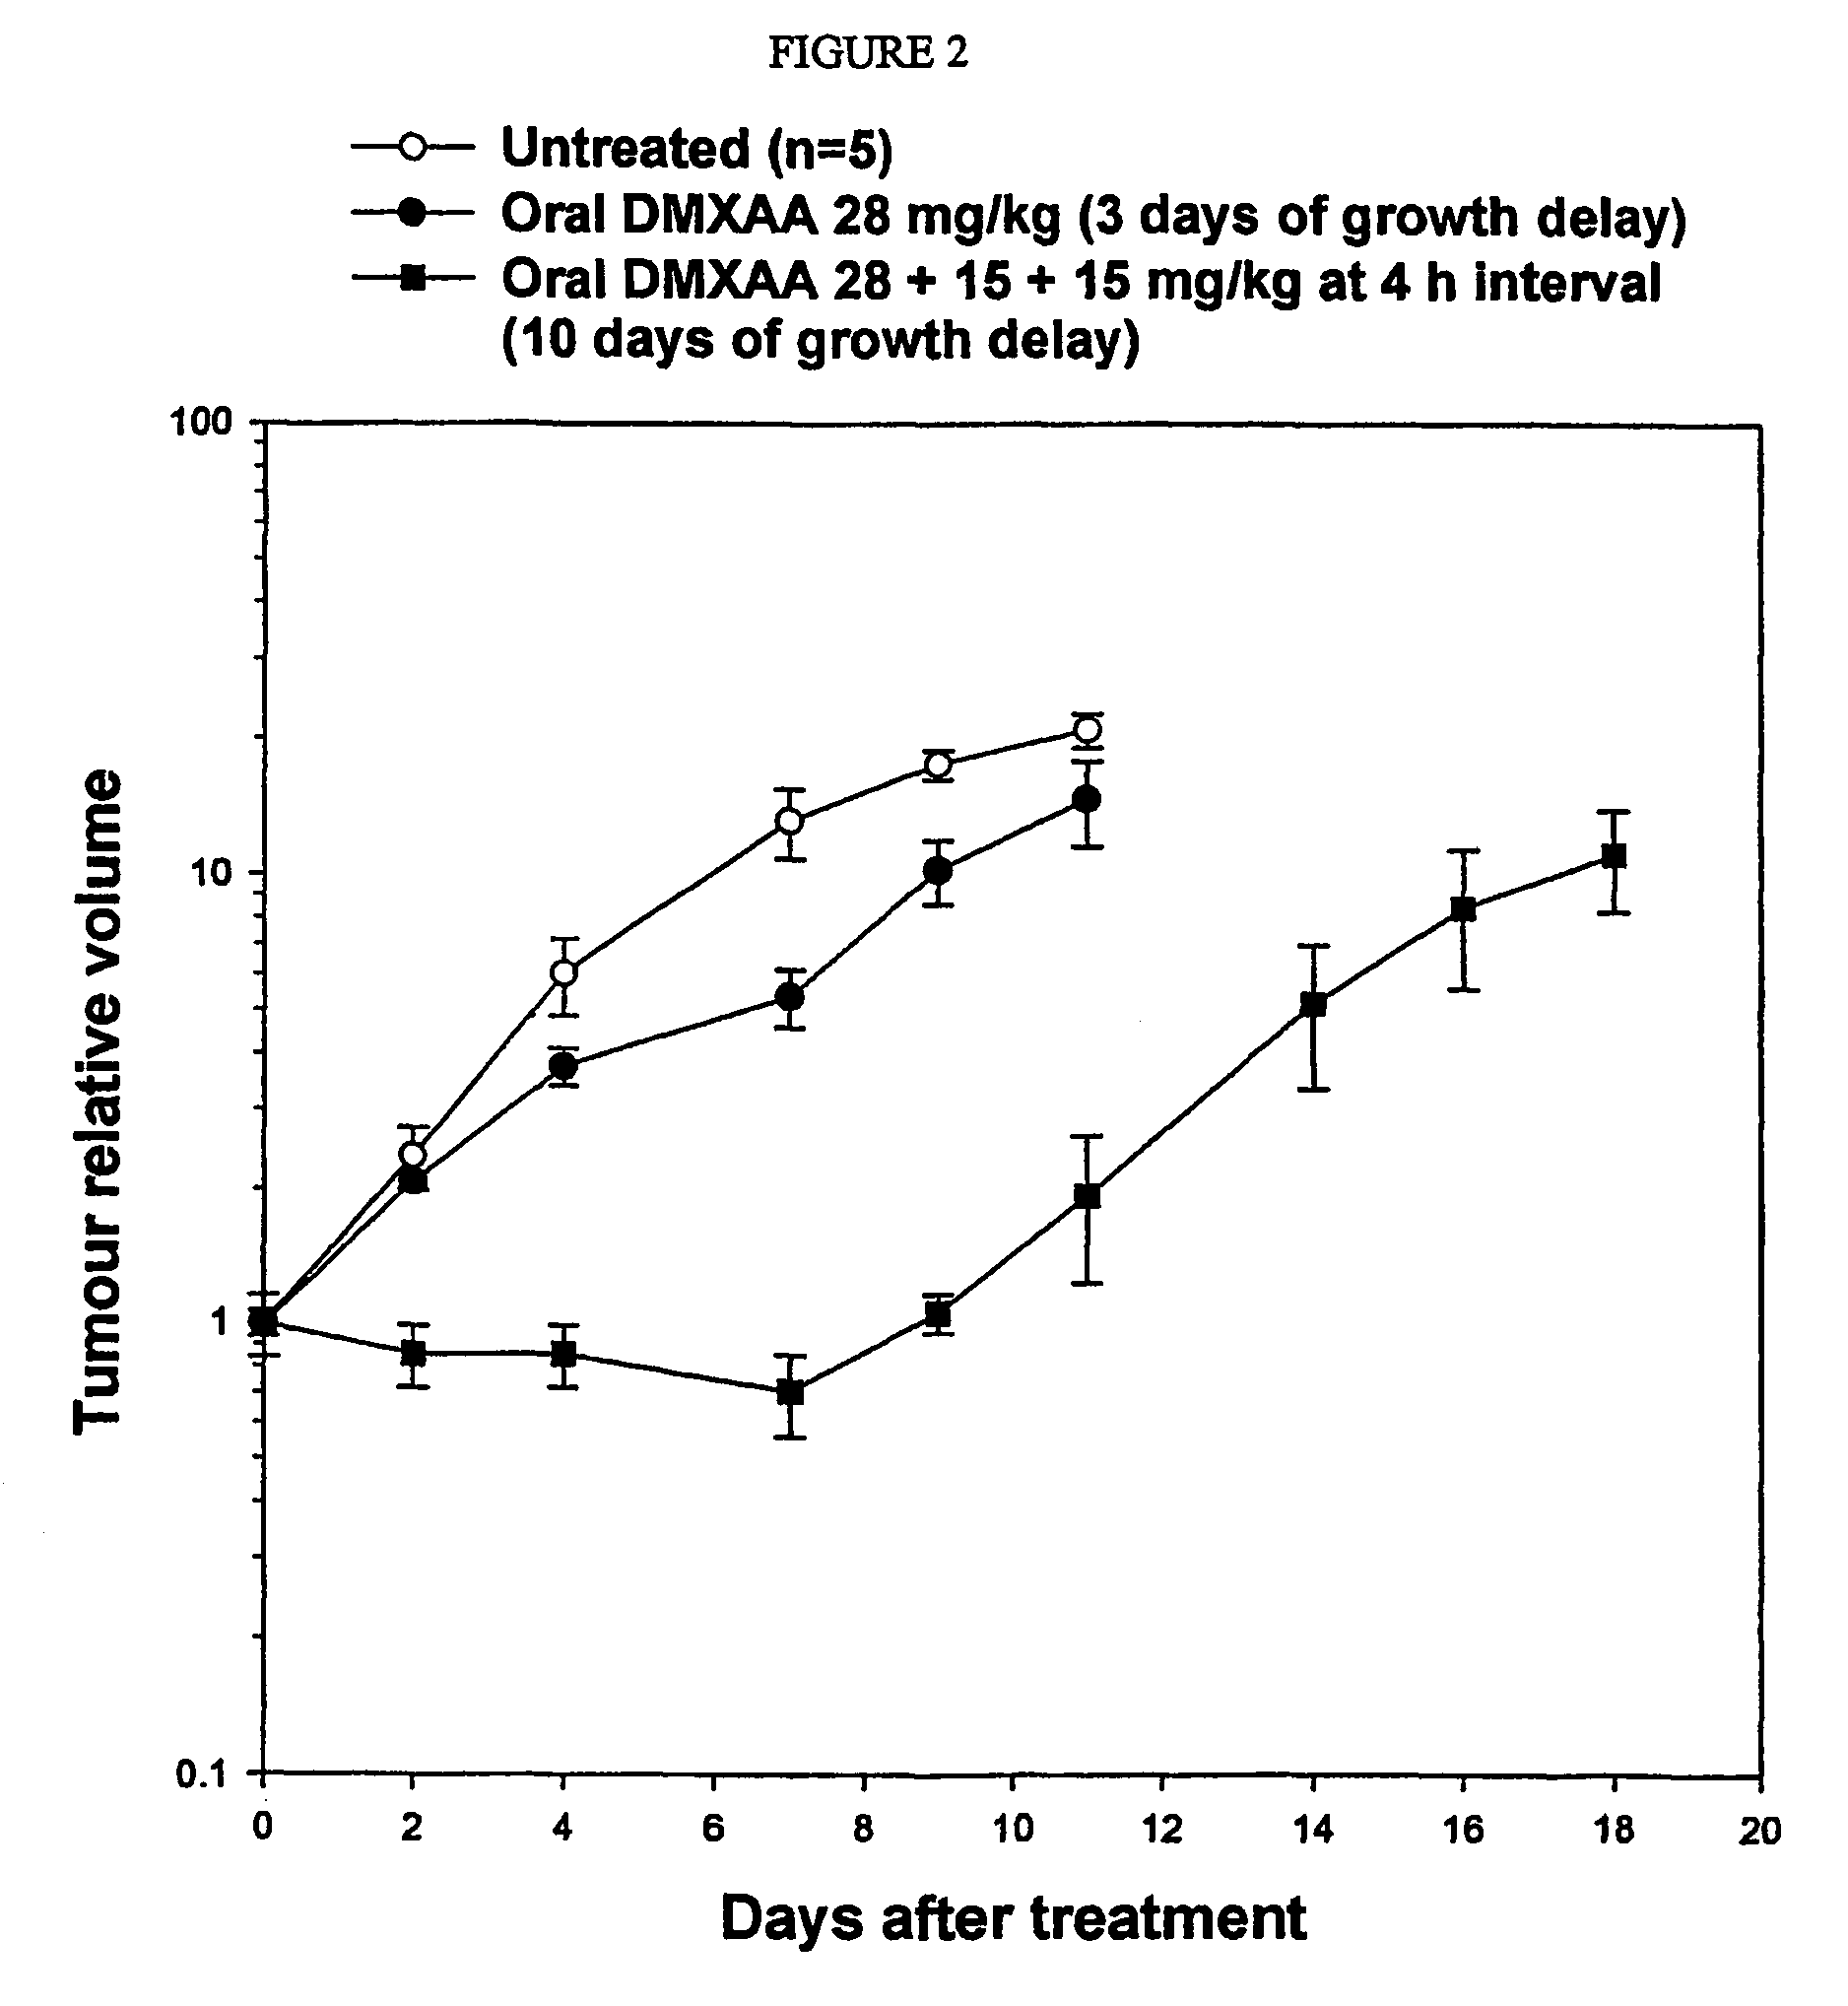 Anti-cancer composition comprising DMXAA or related compound